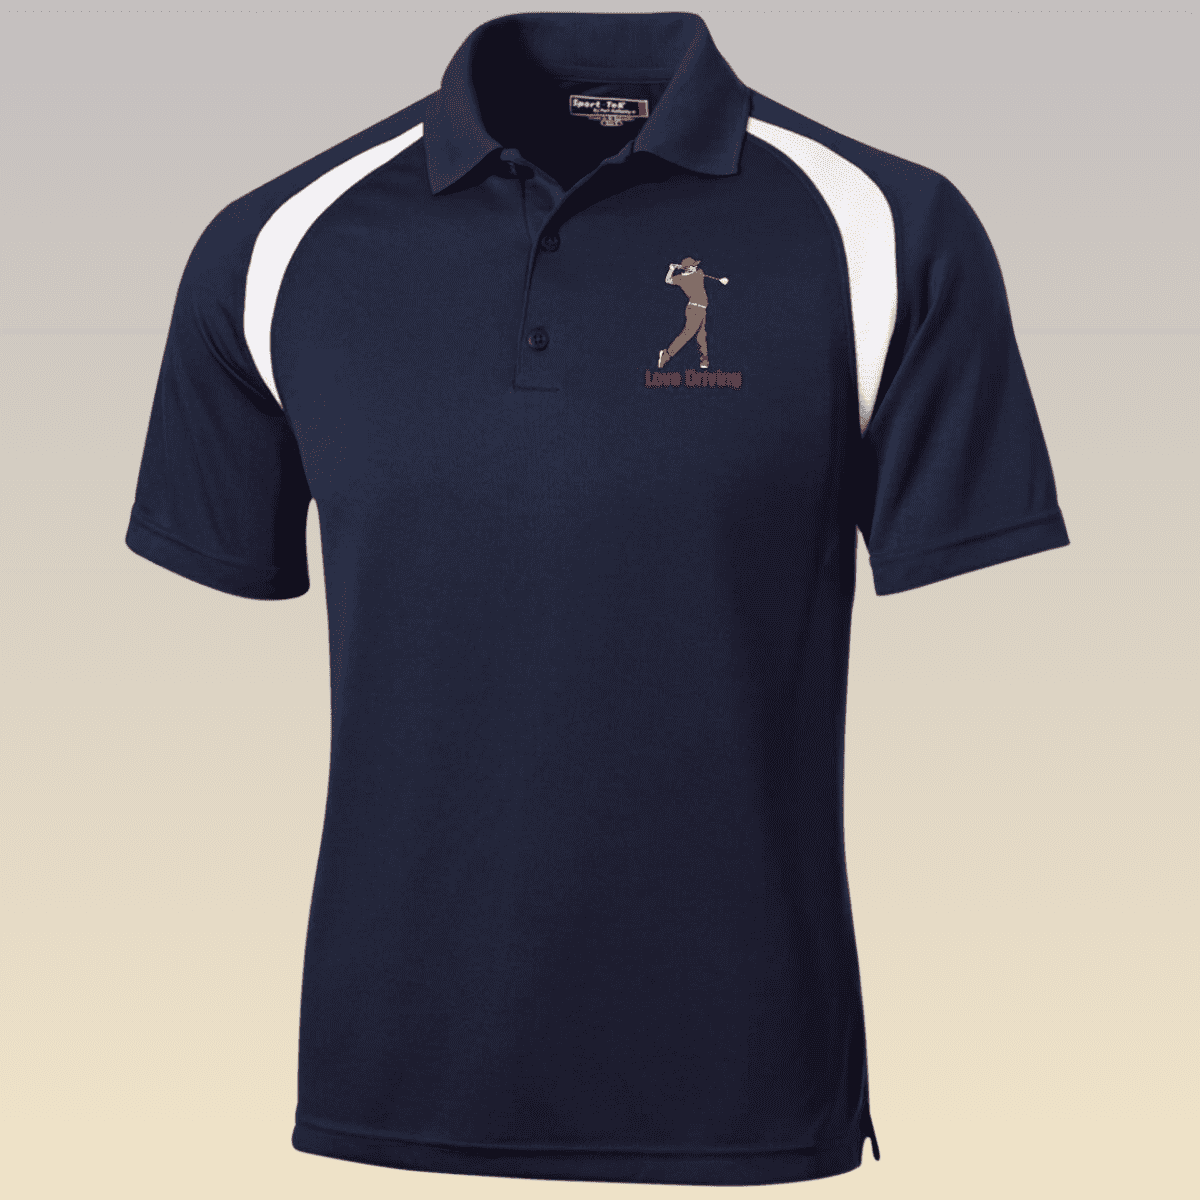 Men's Navy and White Golf Love Driving Moisture-Wicking Polo Shirt